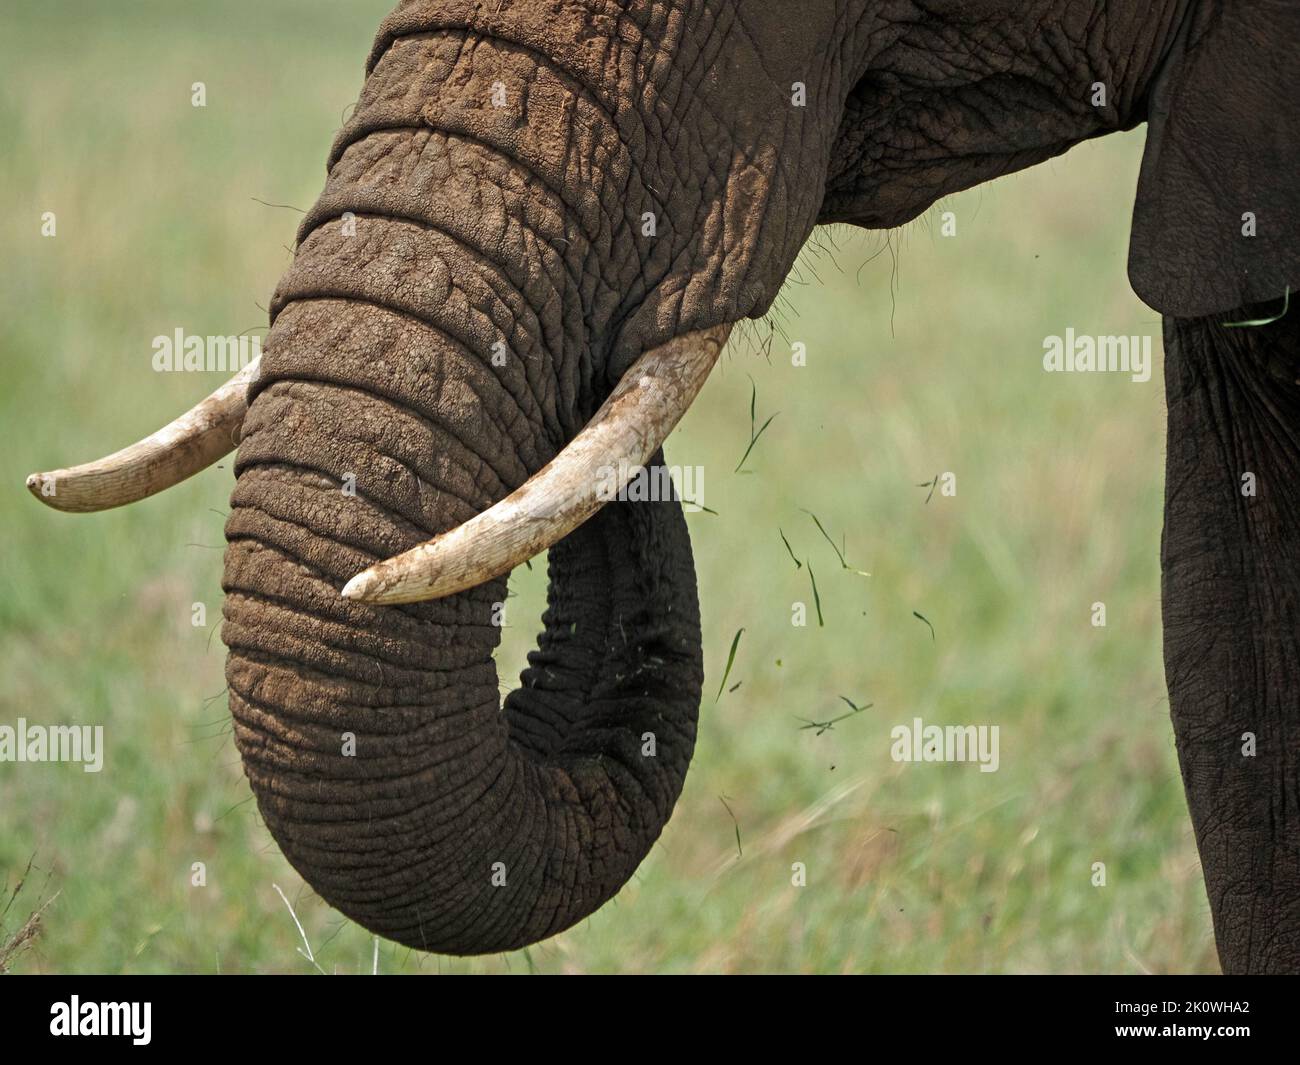 close up of grass falling from mouth of single African elephant (Loxodonta africana) feeding with curled trunk - Masai Mara grasslands Kenya,Africa Stock Photo